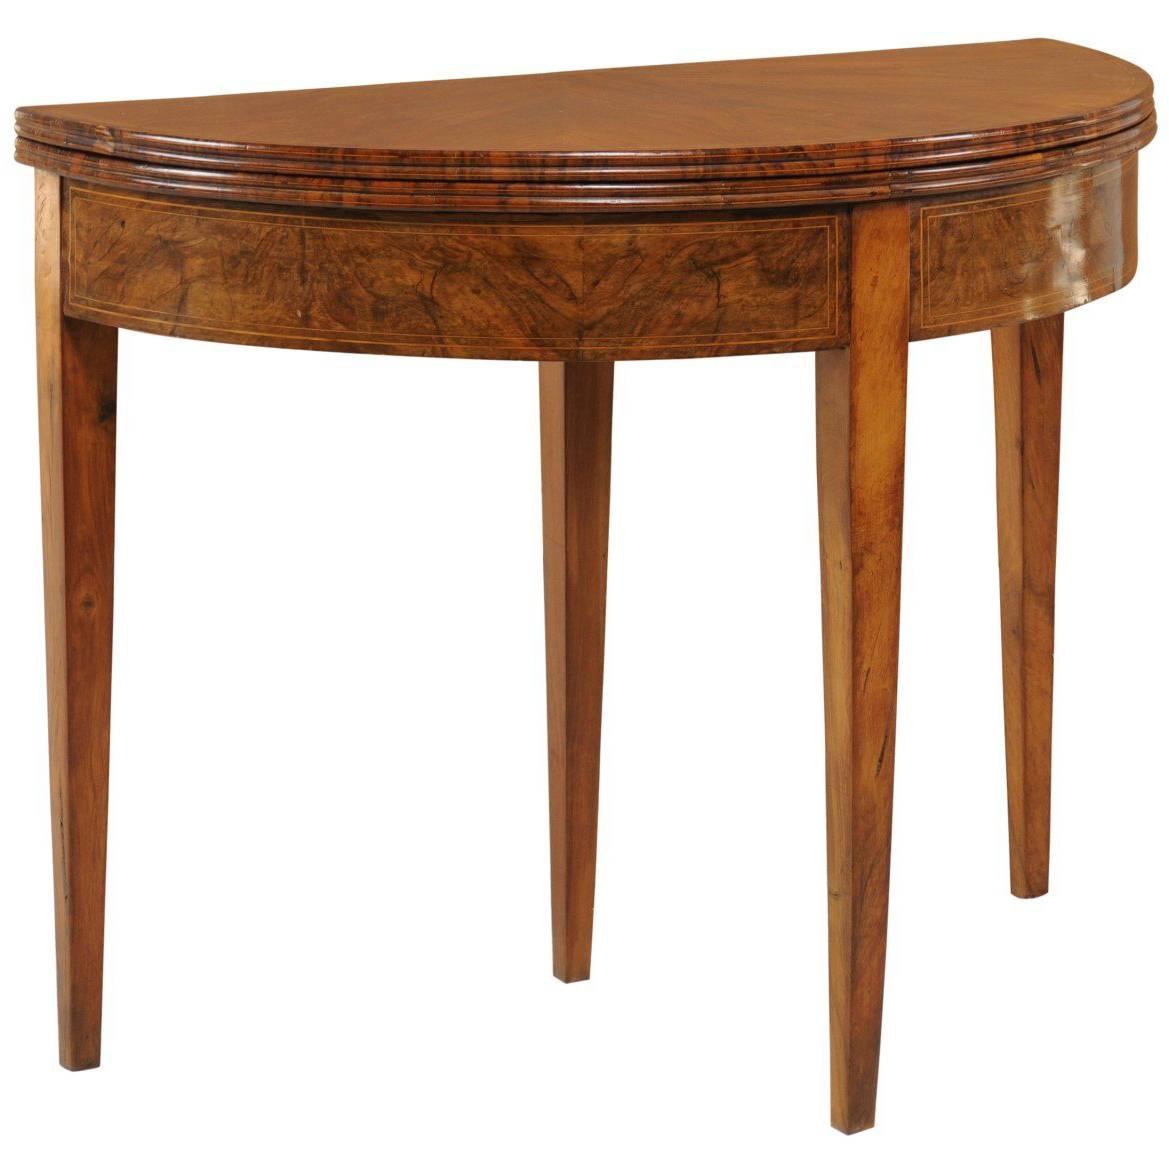 French Burled Walnut Folding Demilune Console Table with Hidden Drawer, 1890s